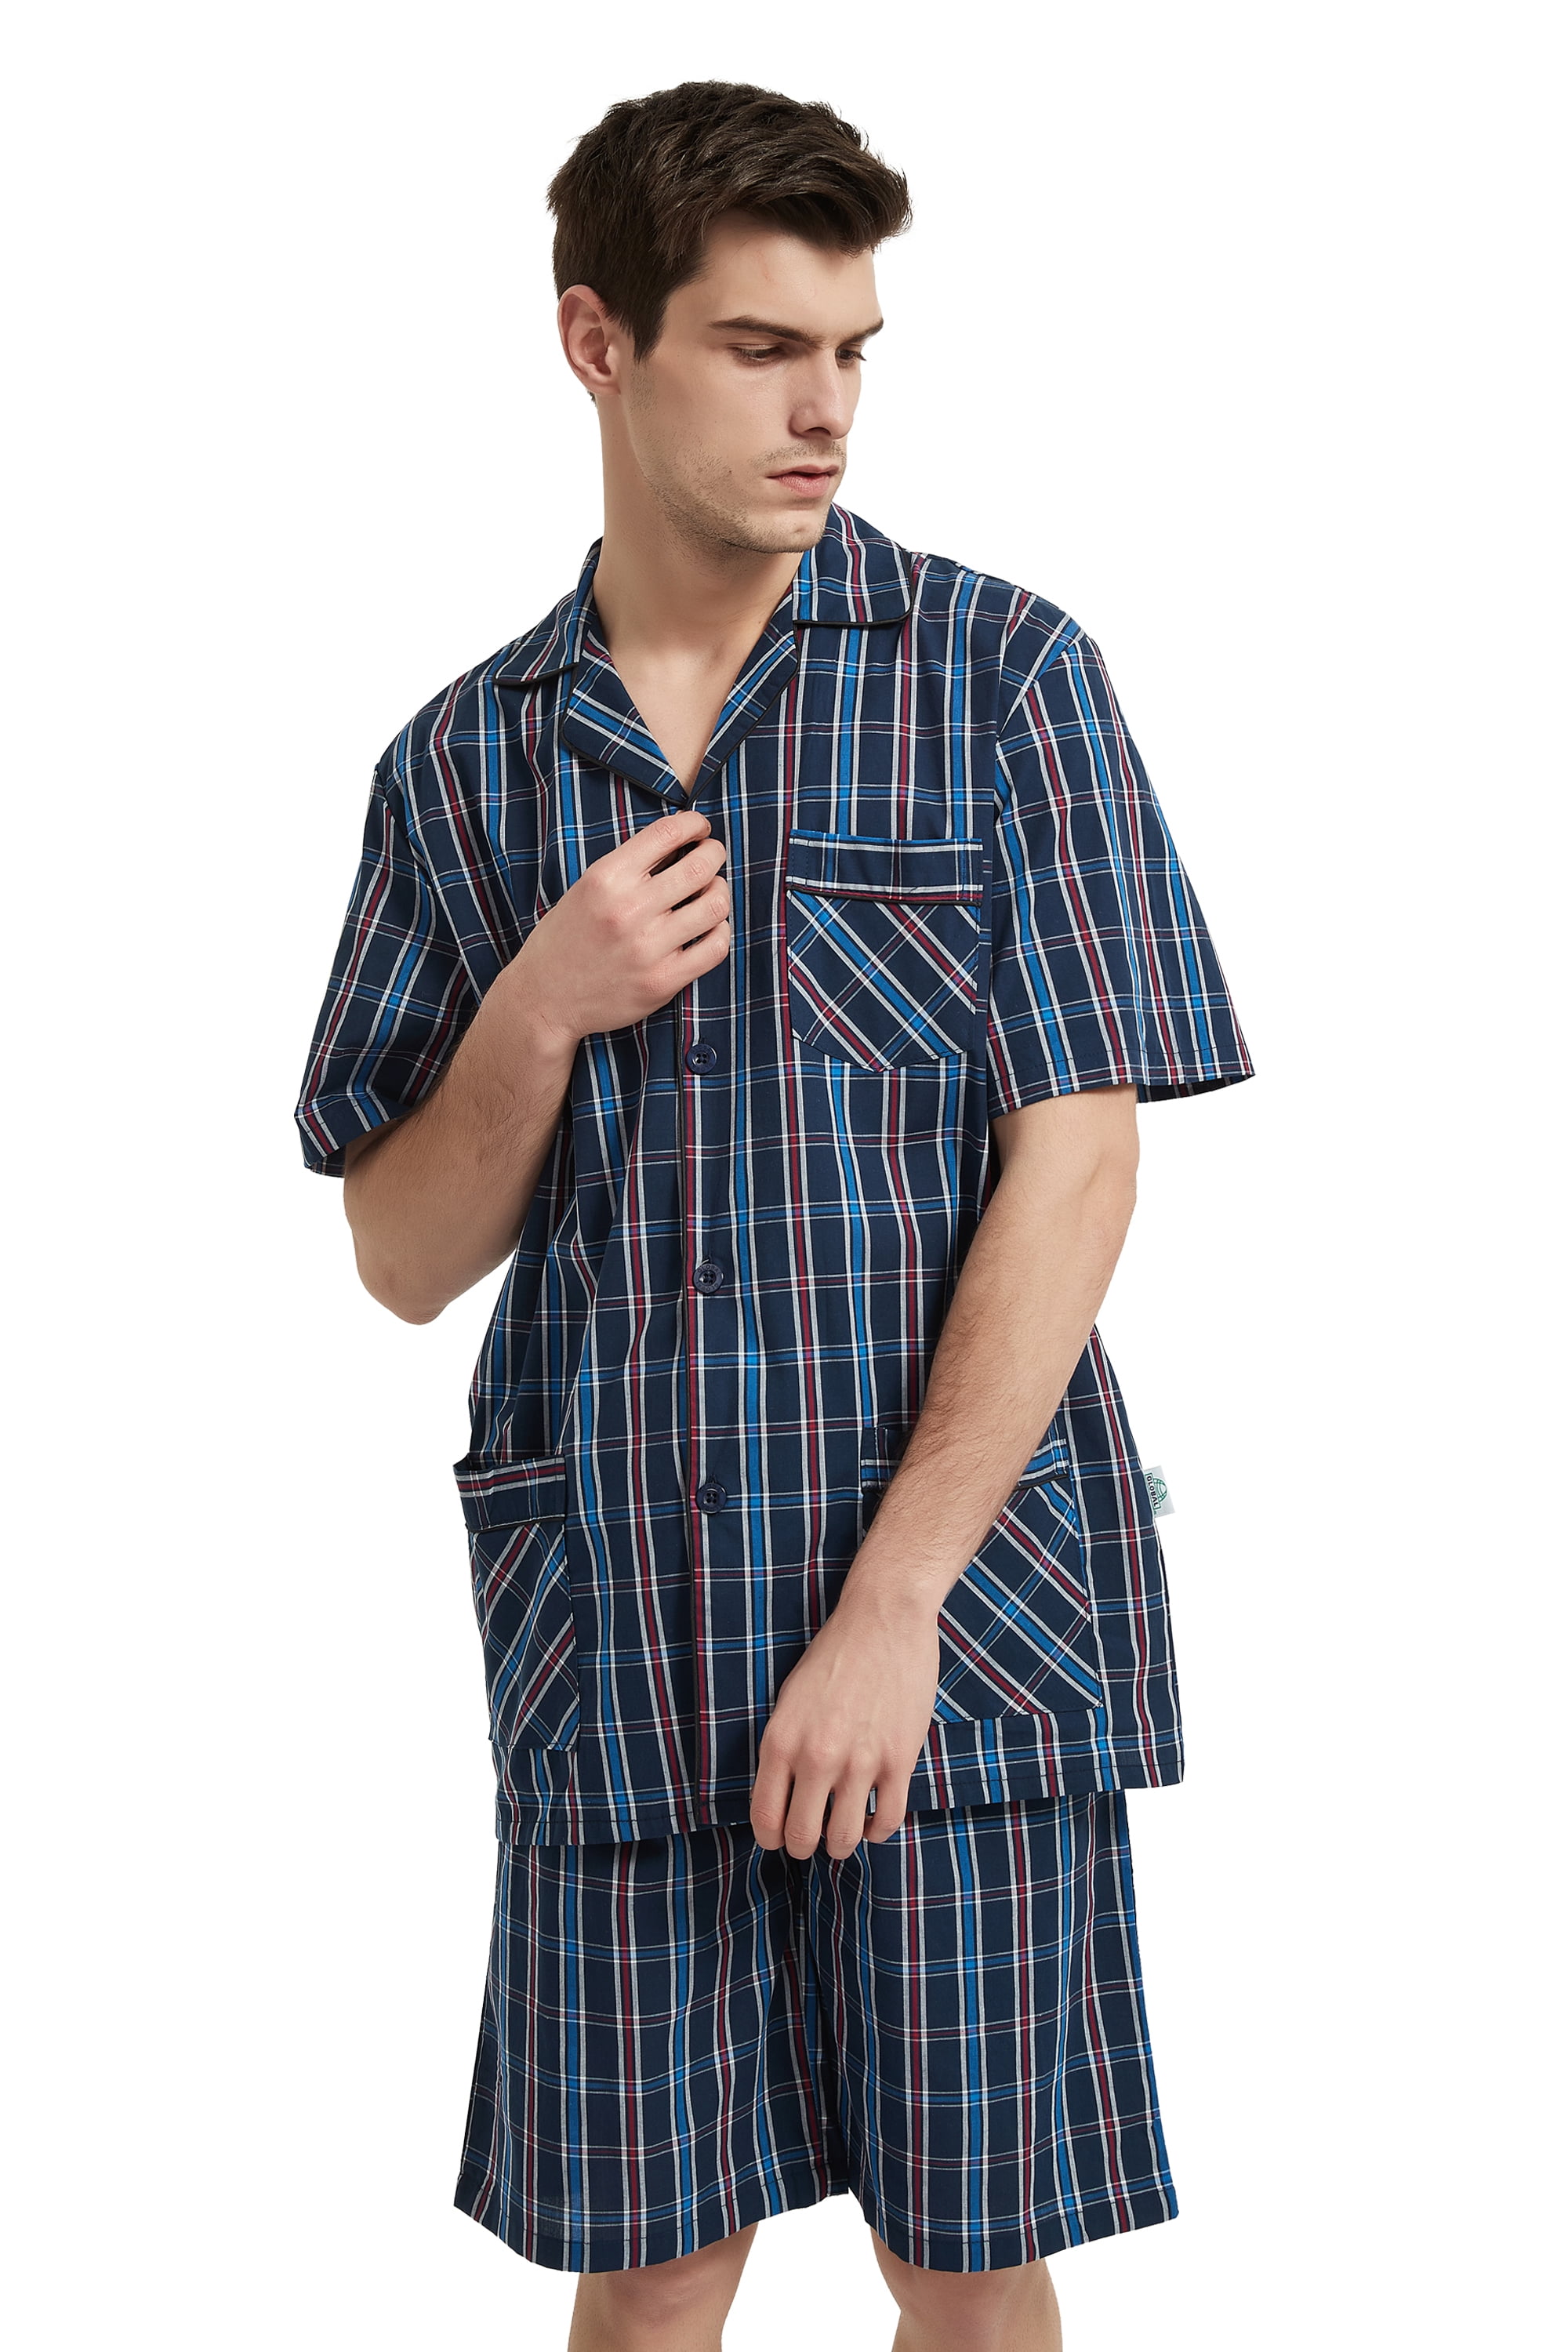 GLOBAL Men’s Cotton Short Sleeve and Shorts Yarn Pajama Set with ...